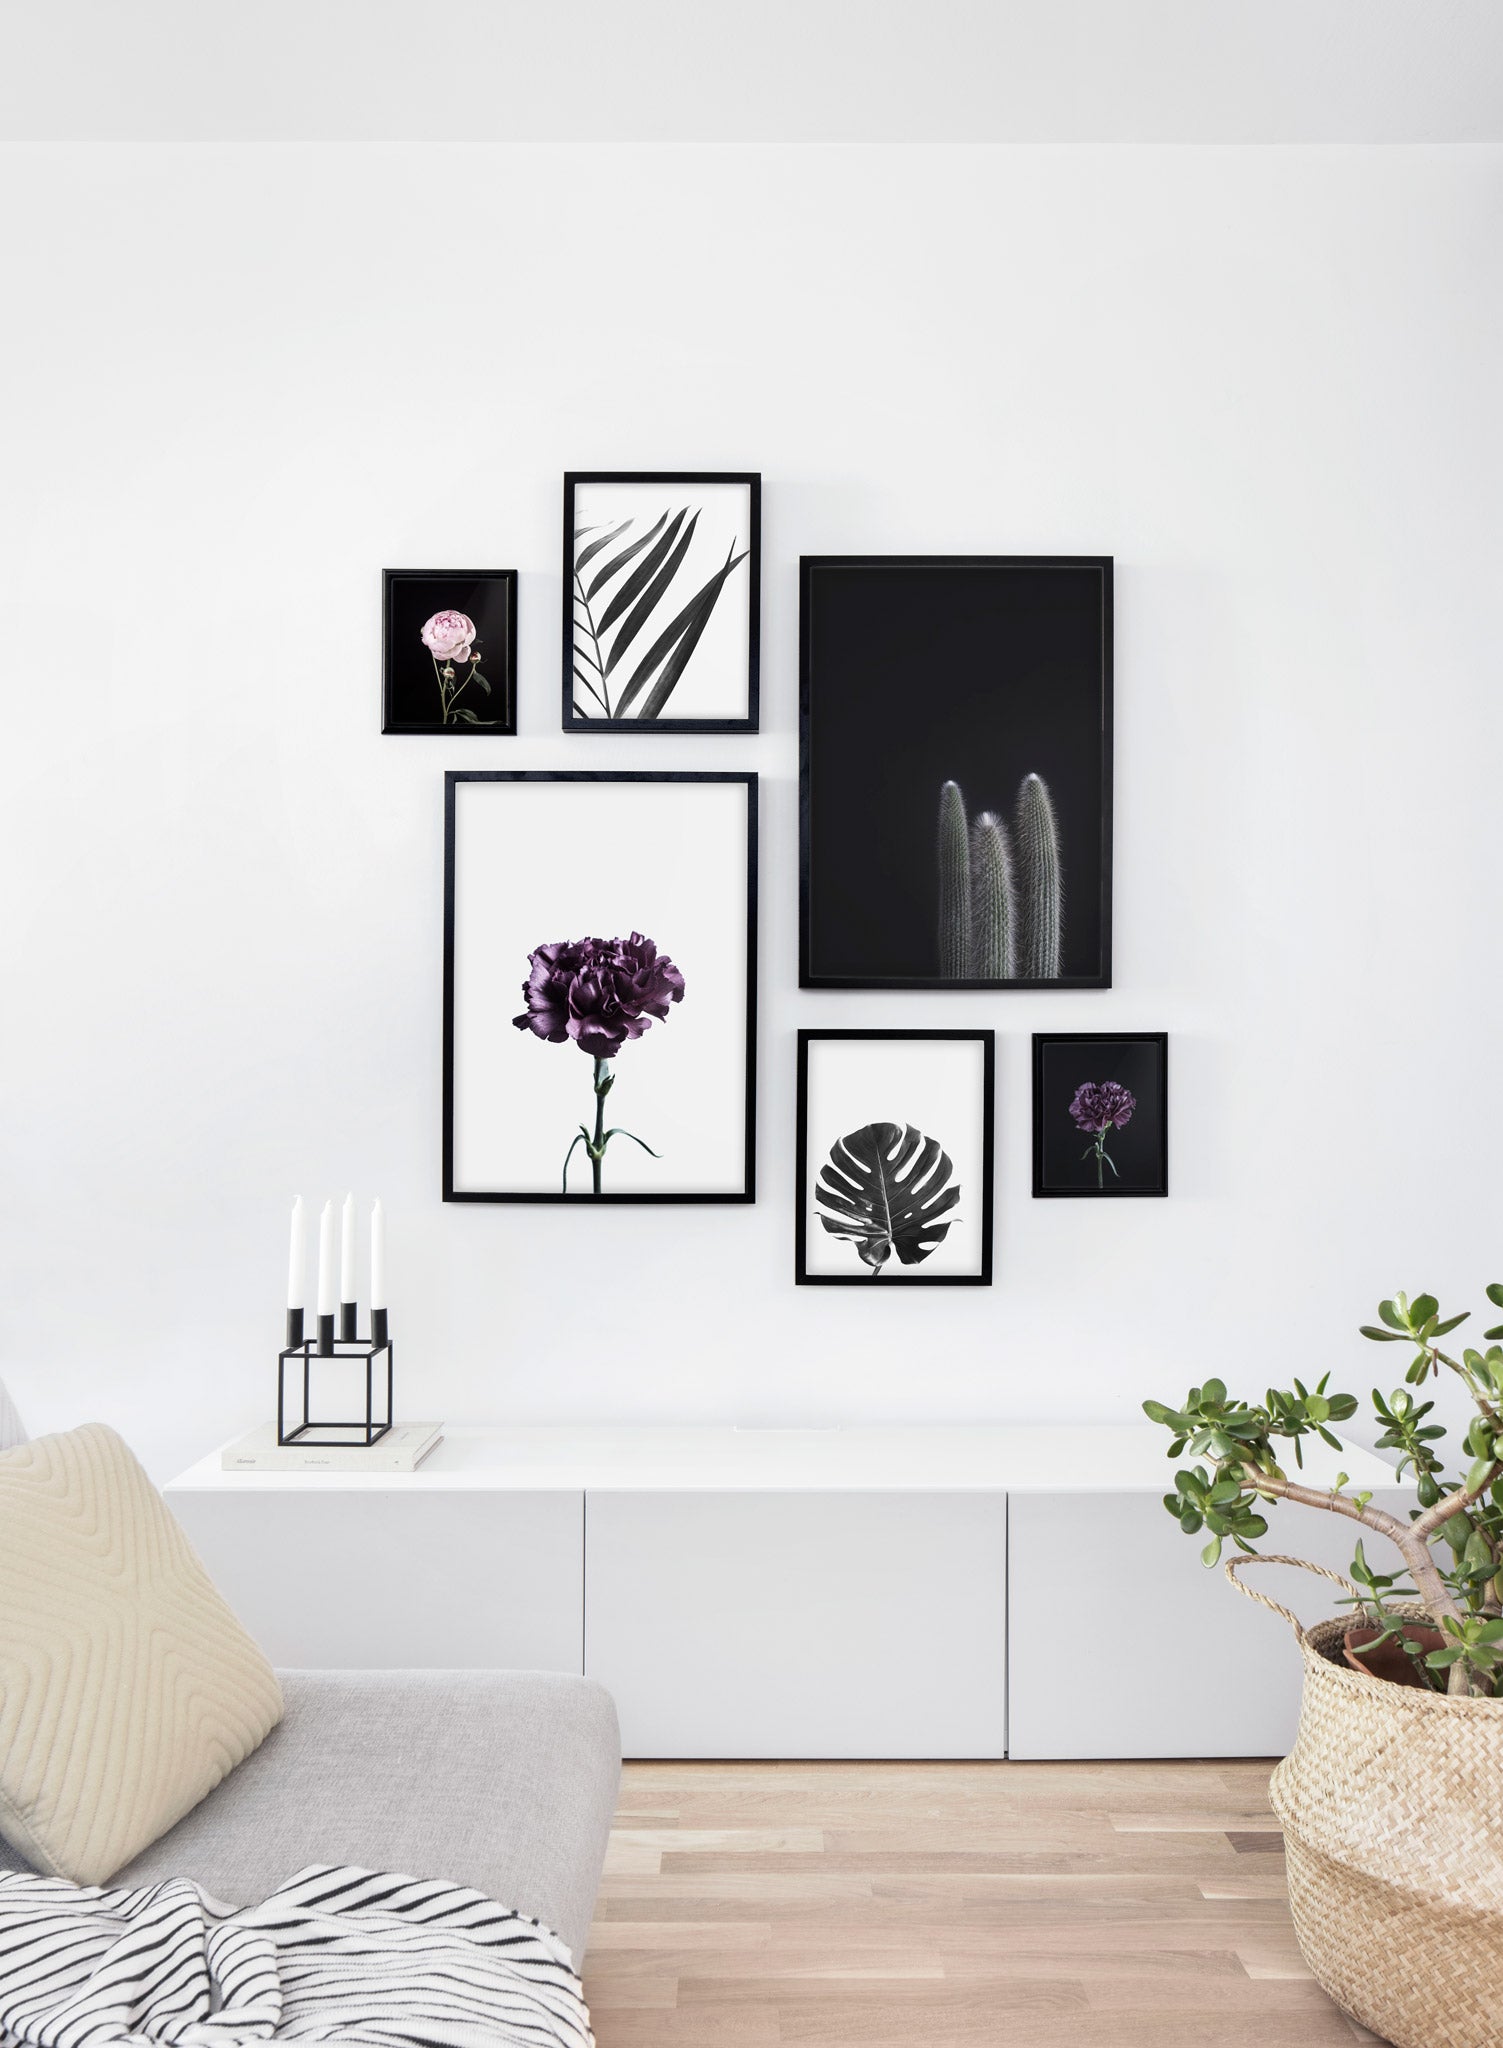 minimalist art print by Opposite Wall with cool with cactus on black bacground - Living room wall gallery